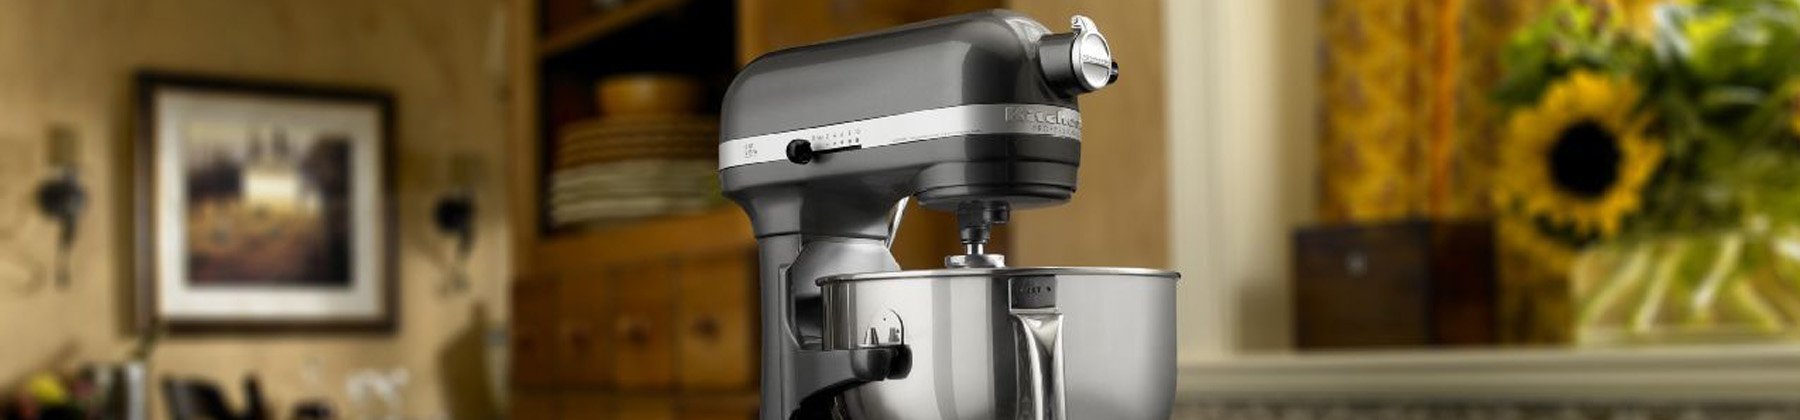 https://cdn.everythingkitchens.com/media/wysiwyg/images/KitchenAid/Mixer-Compatibile-Collection-Banner-6.jpg